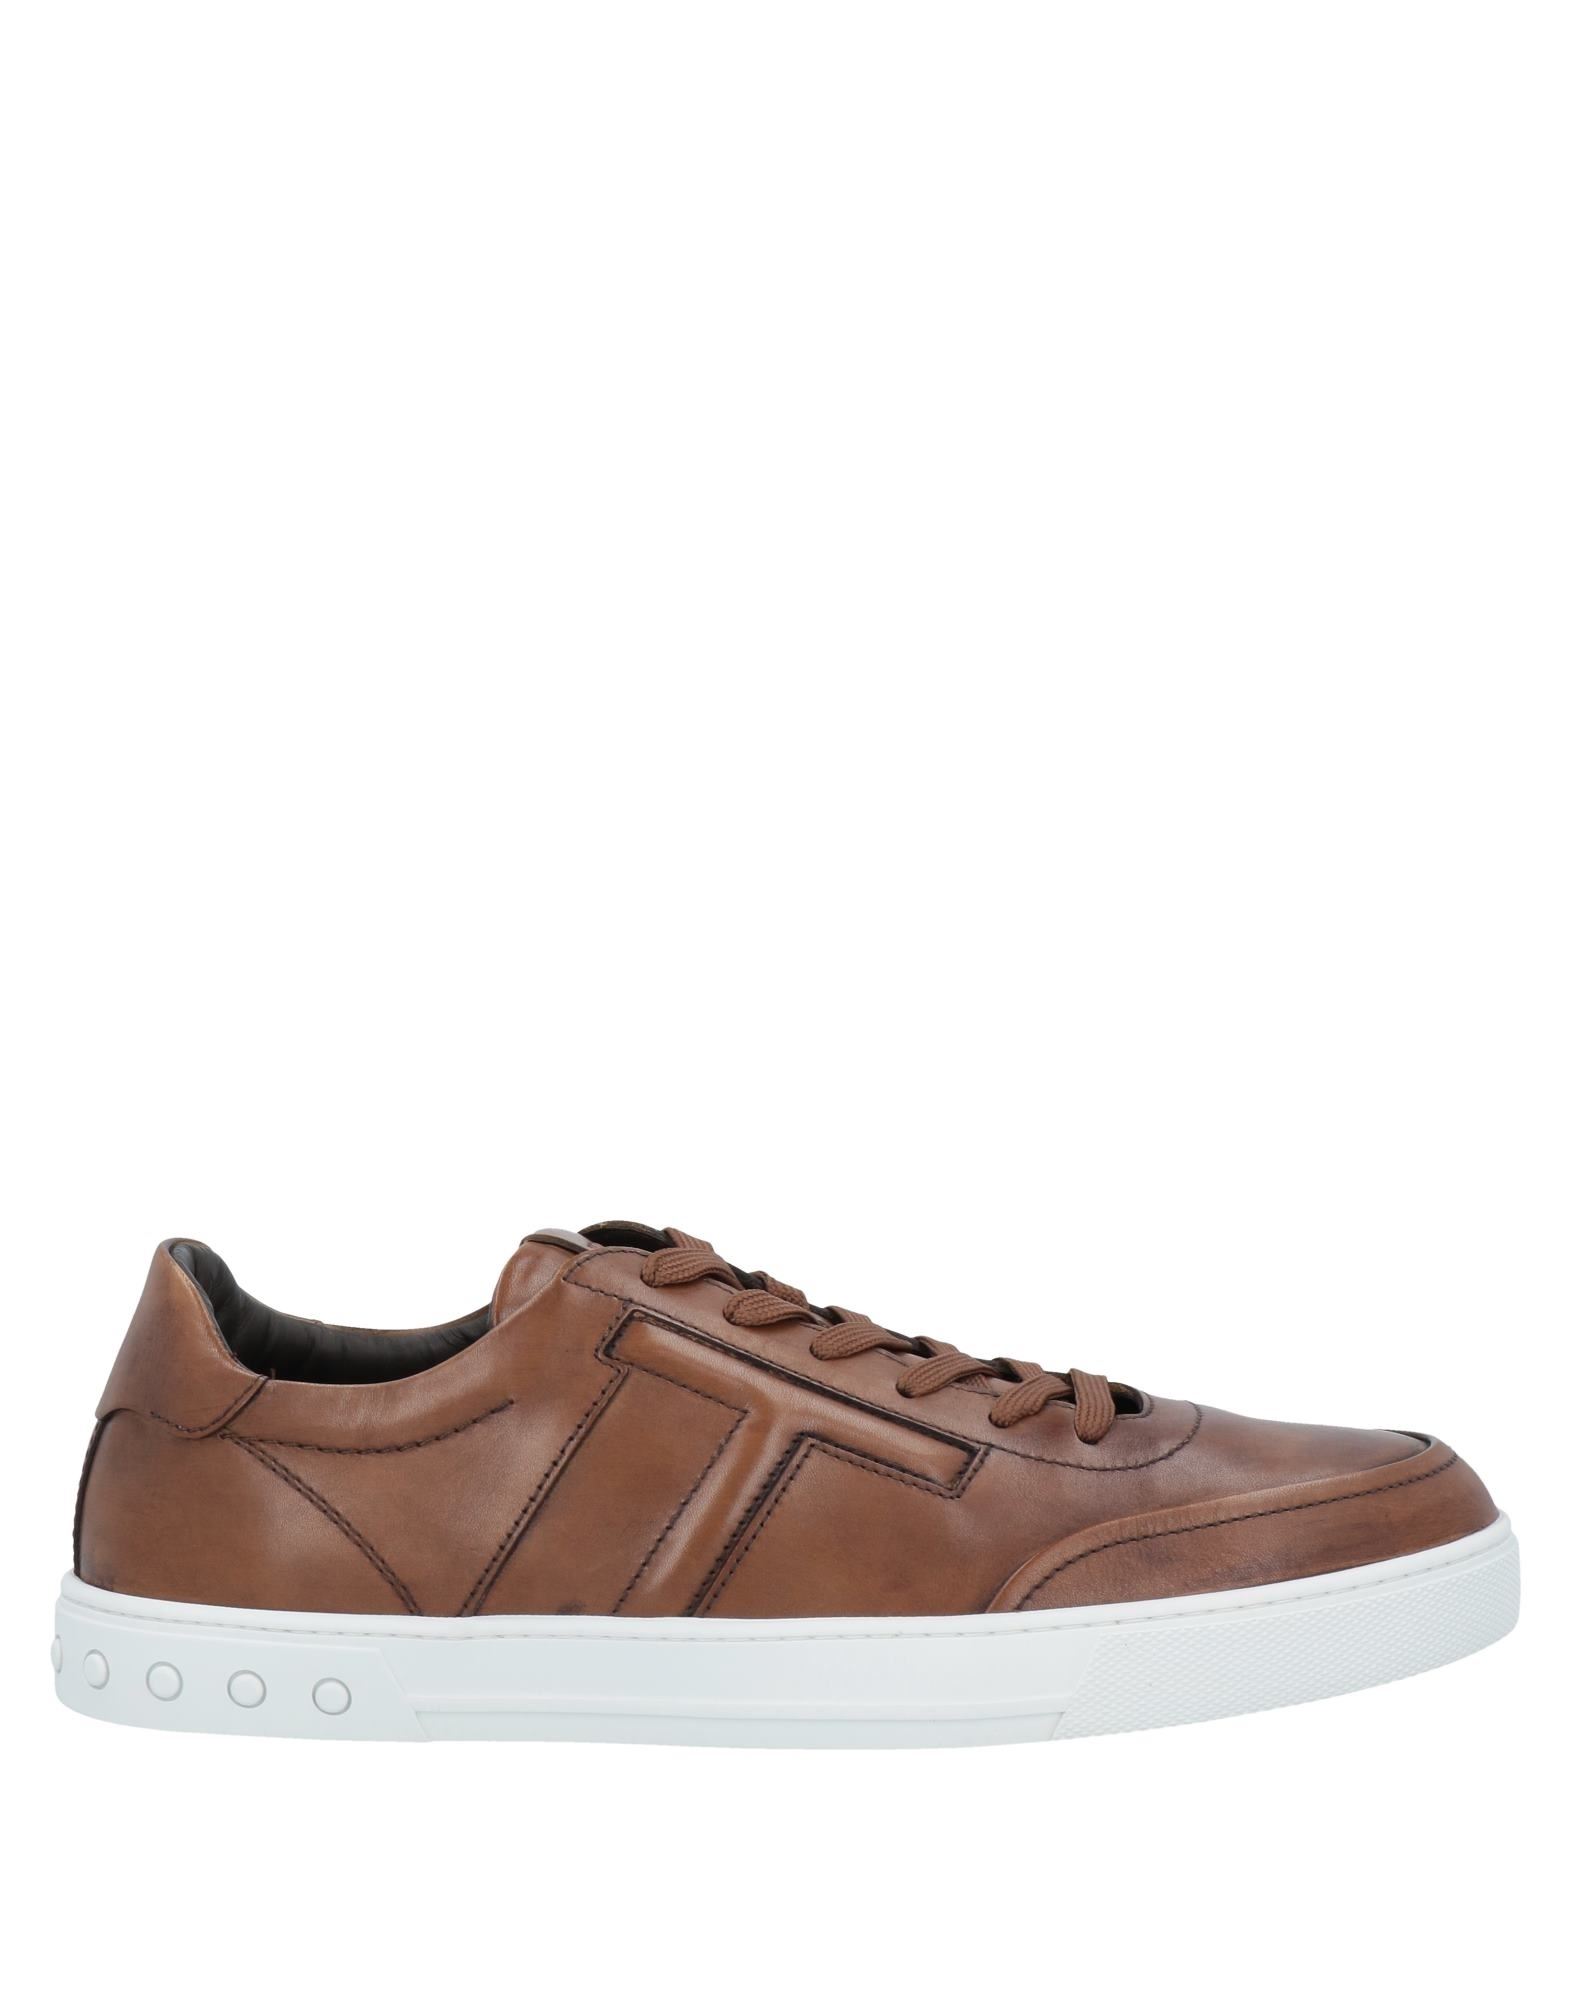 Tod's Man Sneakers Tan Size 7 Soft Leather In Brown